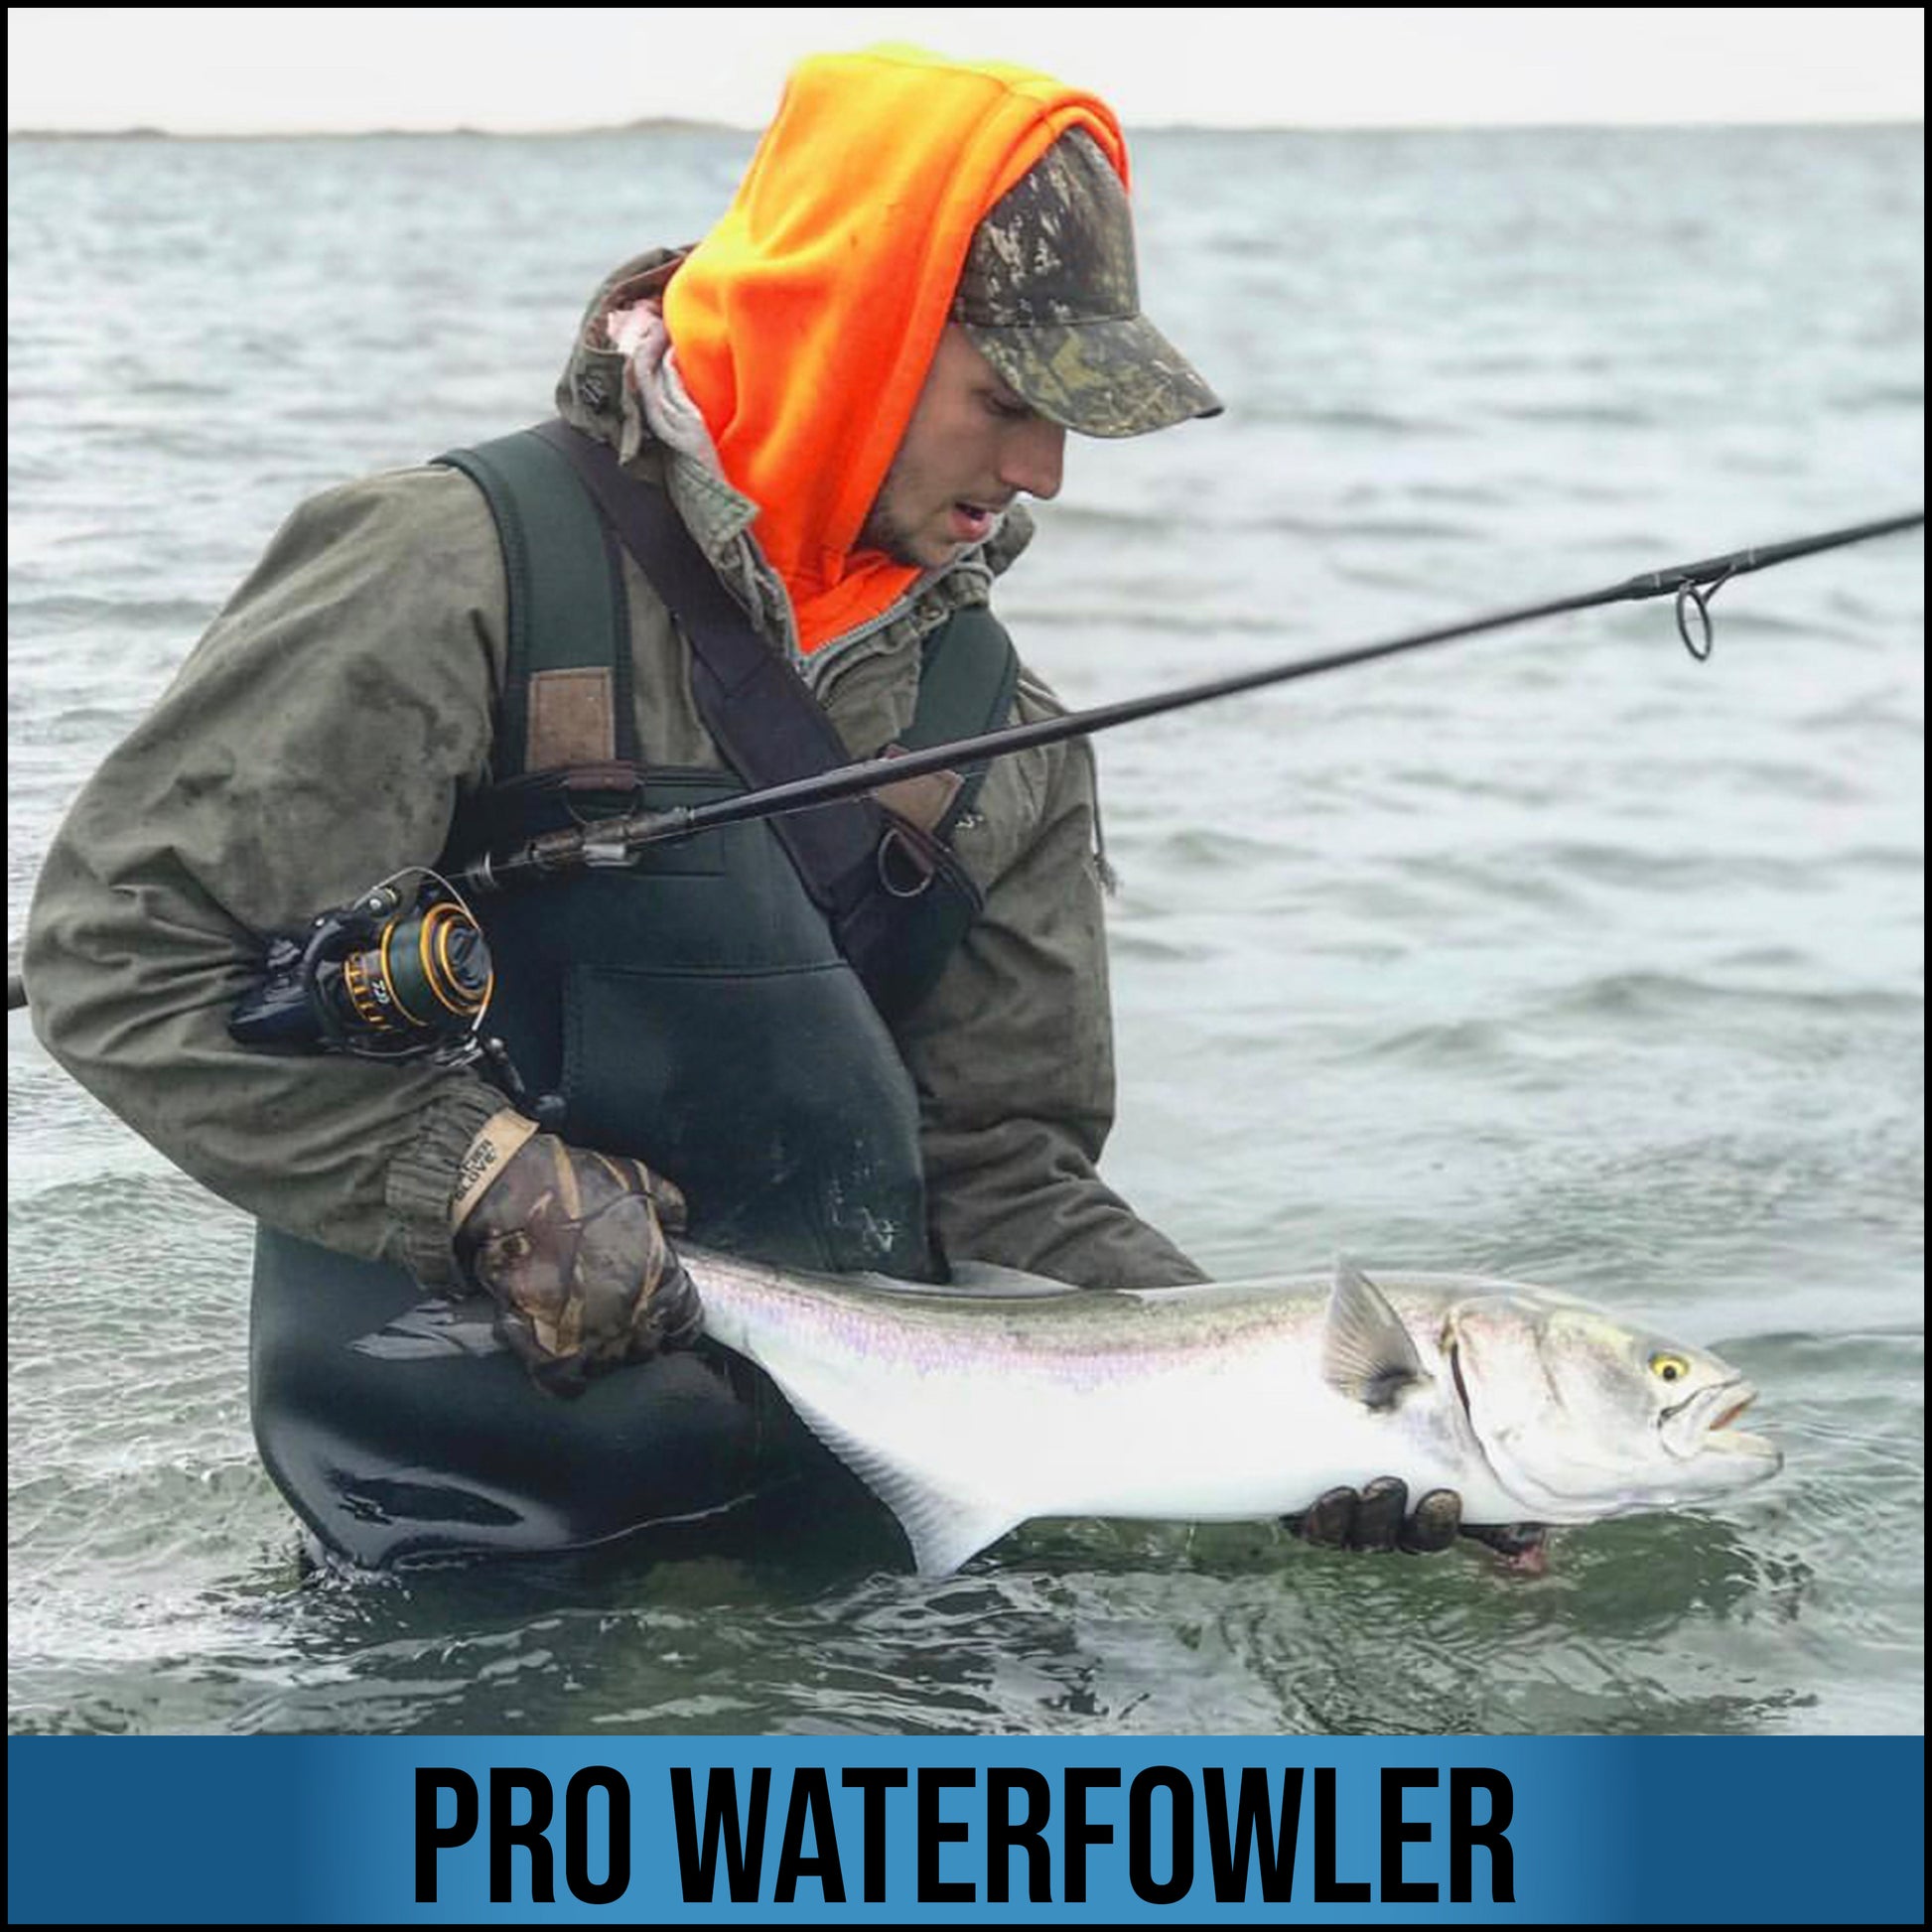 Pro Waterfowler – Glacier Outdoor Products